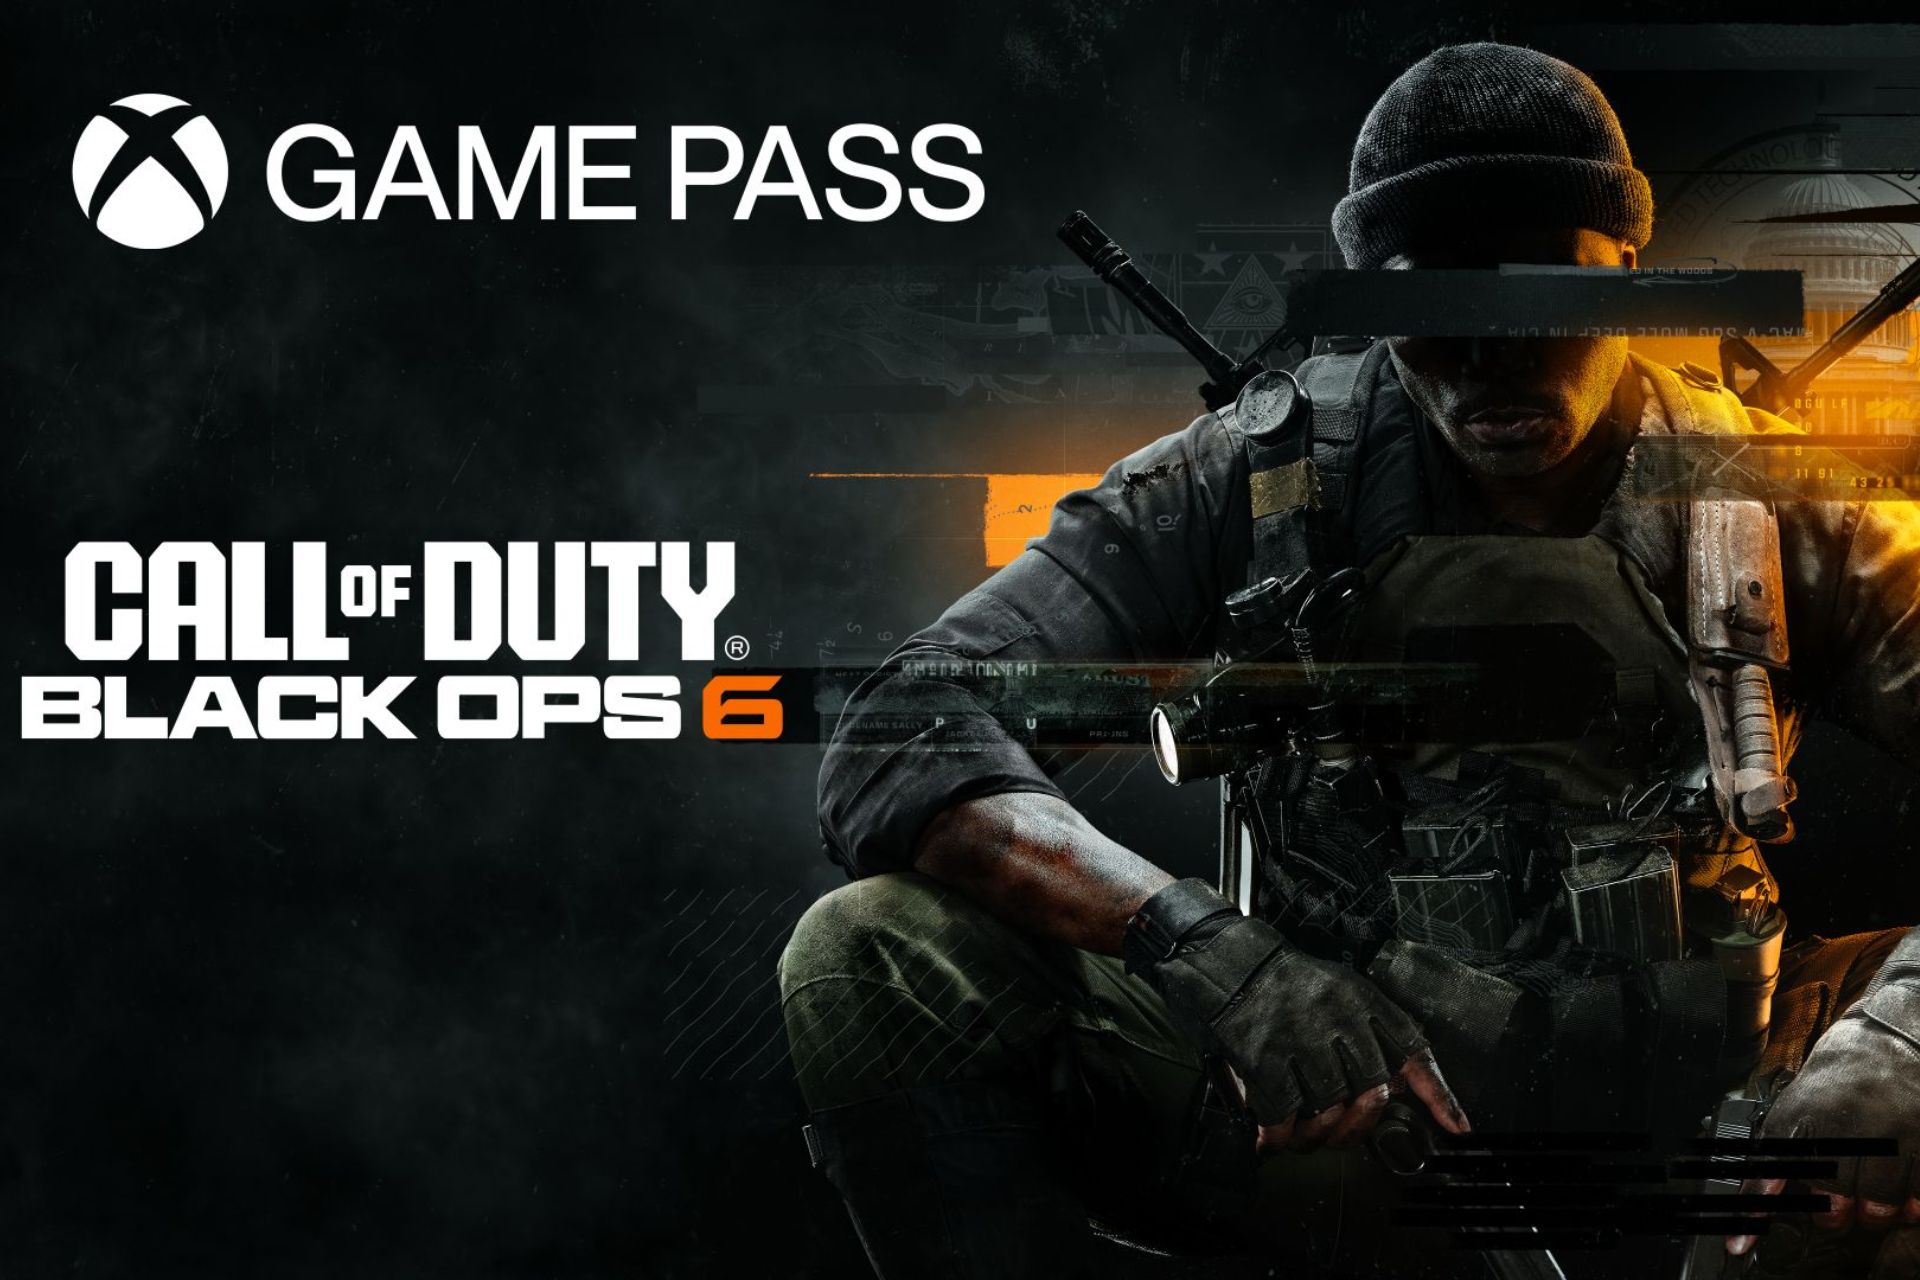 Call of Duty Black Ops 6 won't require a new Xbox Game Pass tier